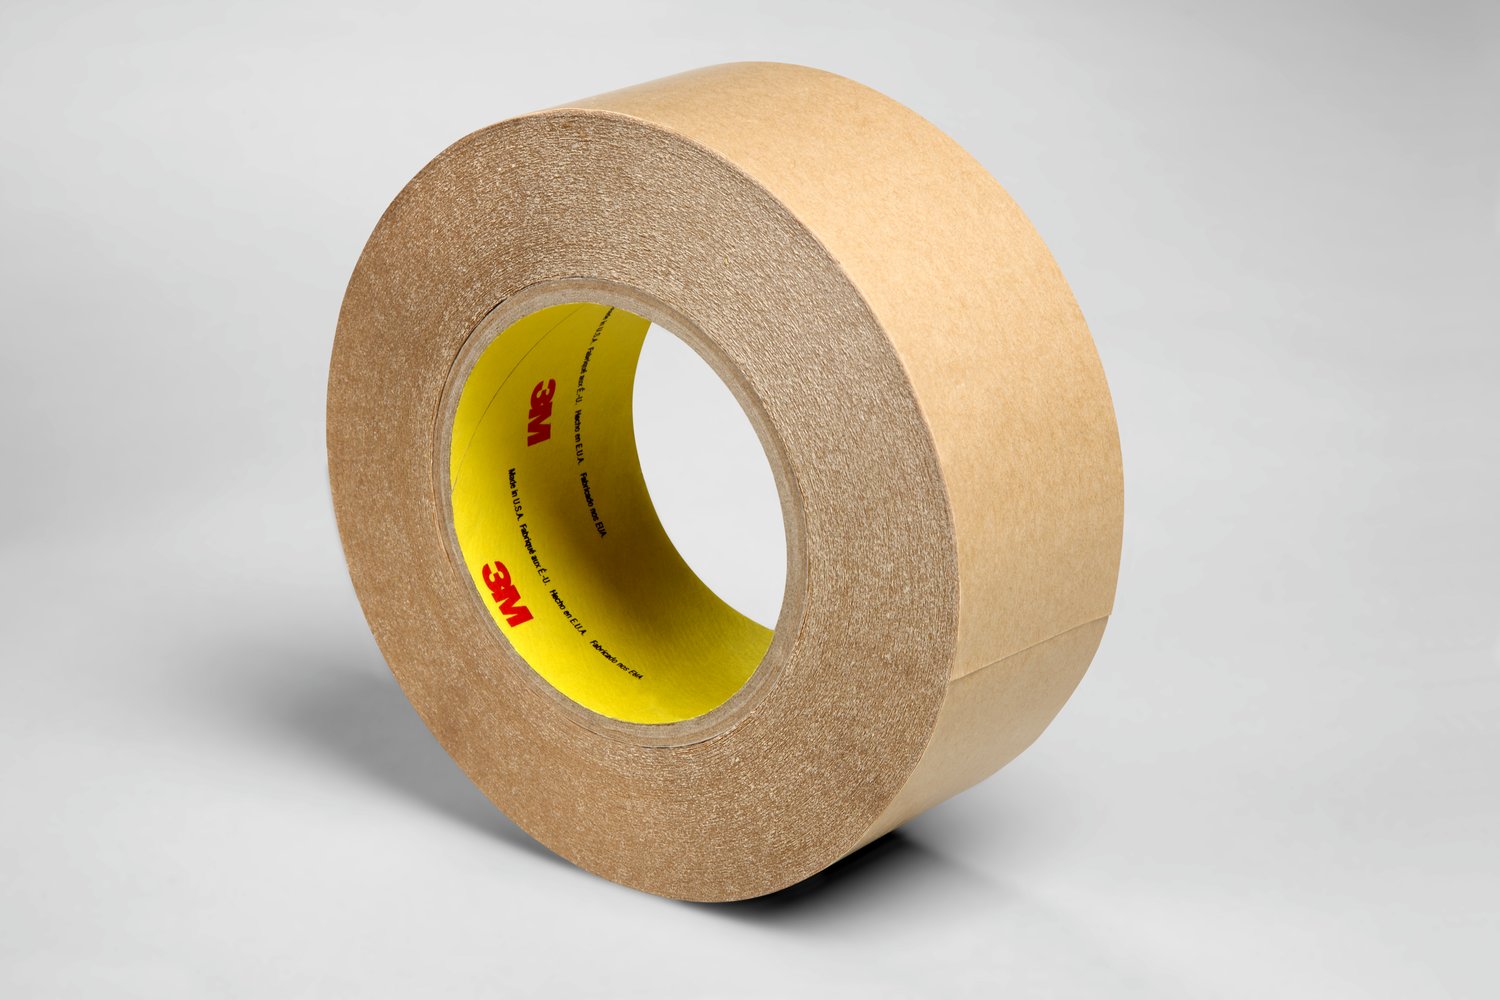 7000049018 - 3M Double Coated Tape 9576, Clear, 24 in x 60 yd, 4 mil, 1 roll per
case